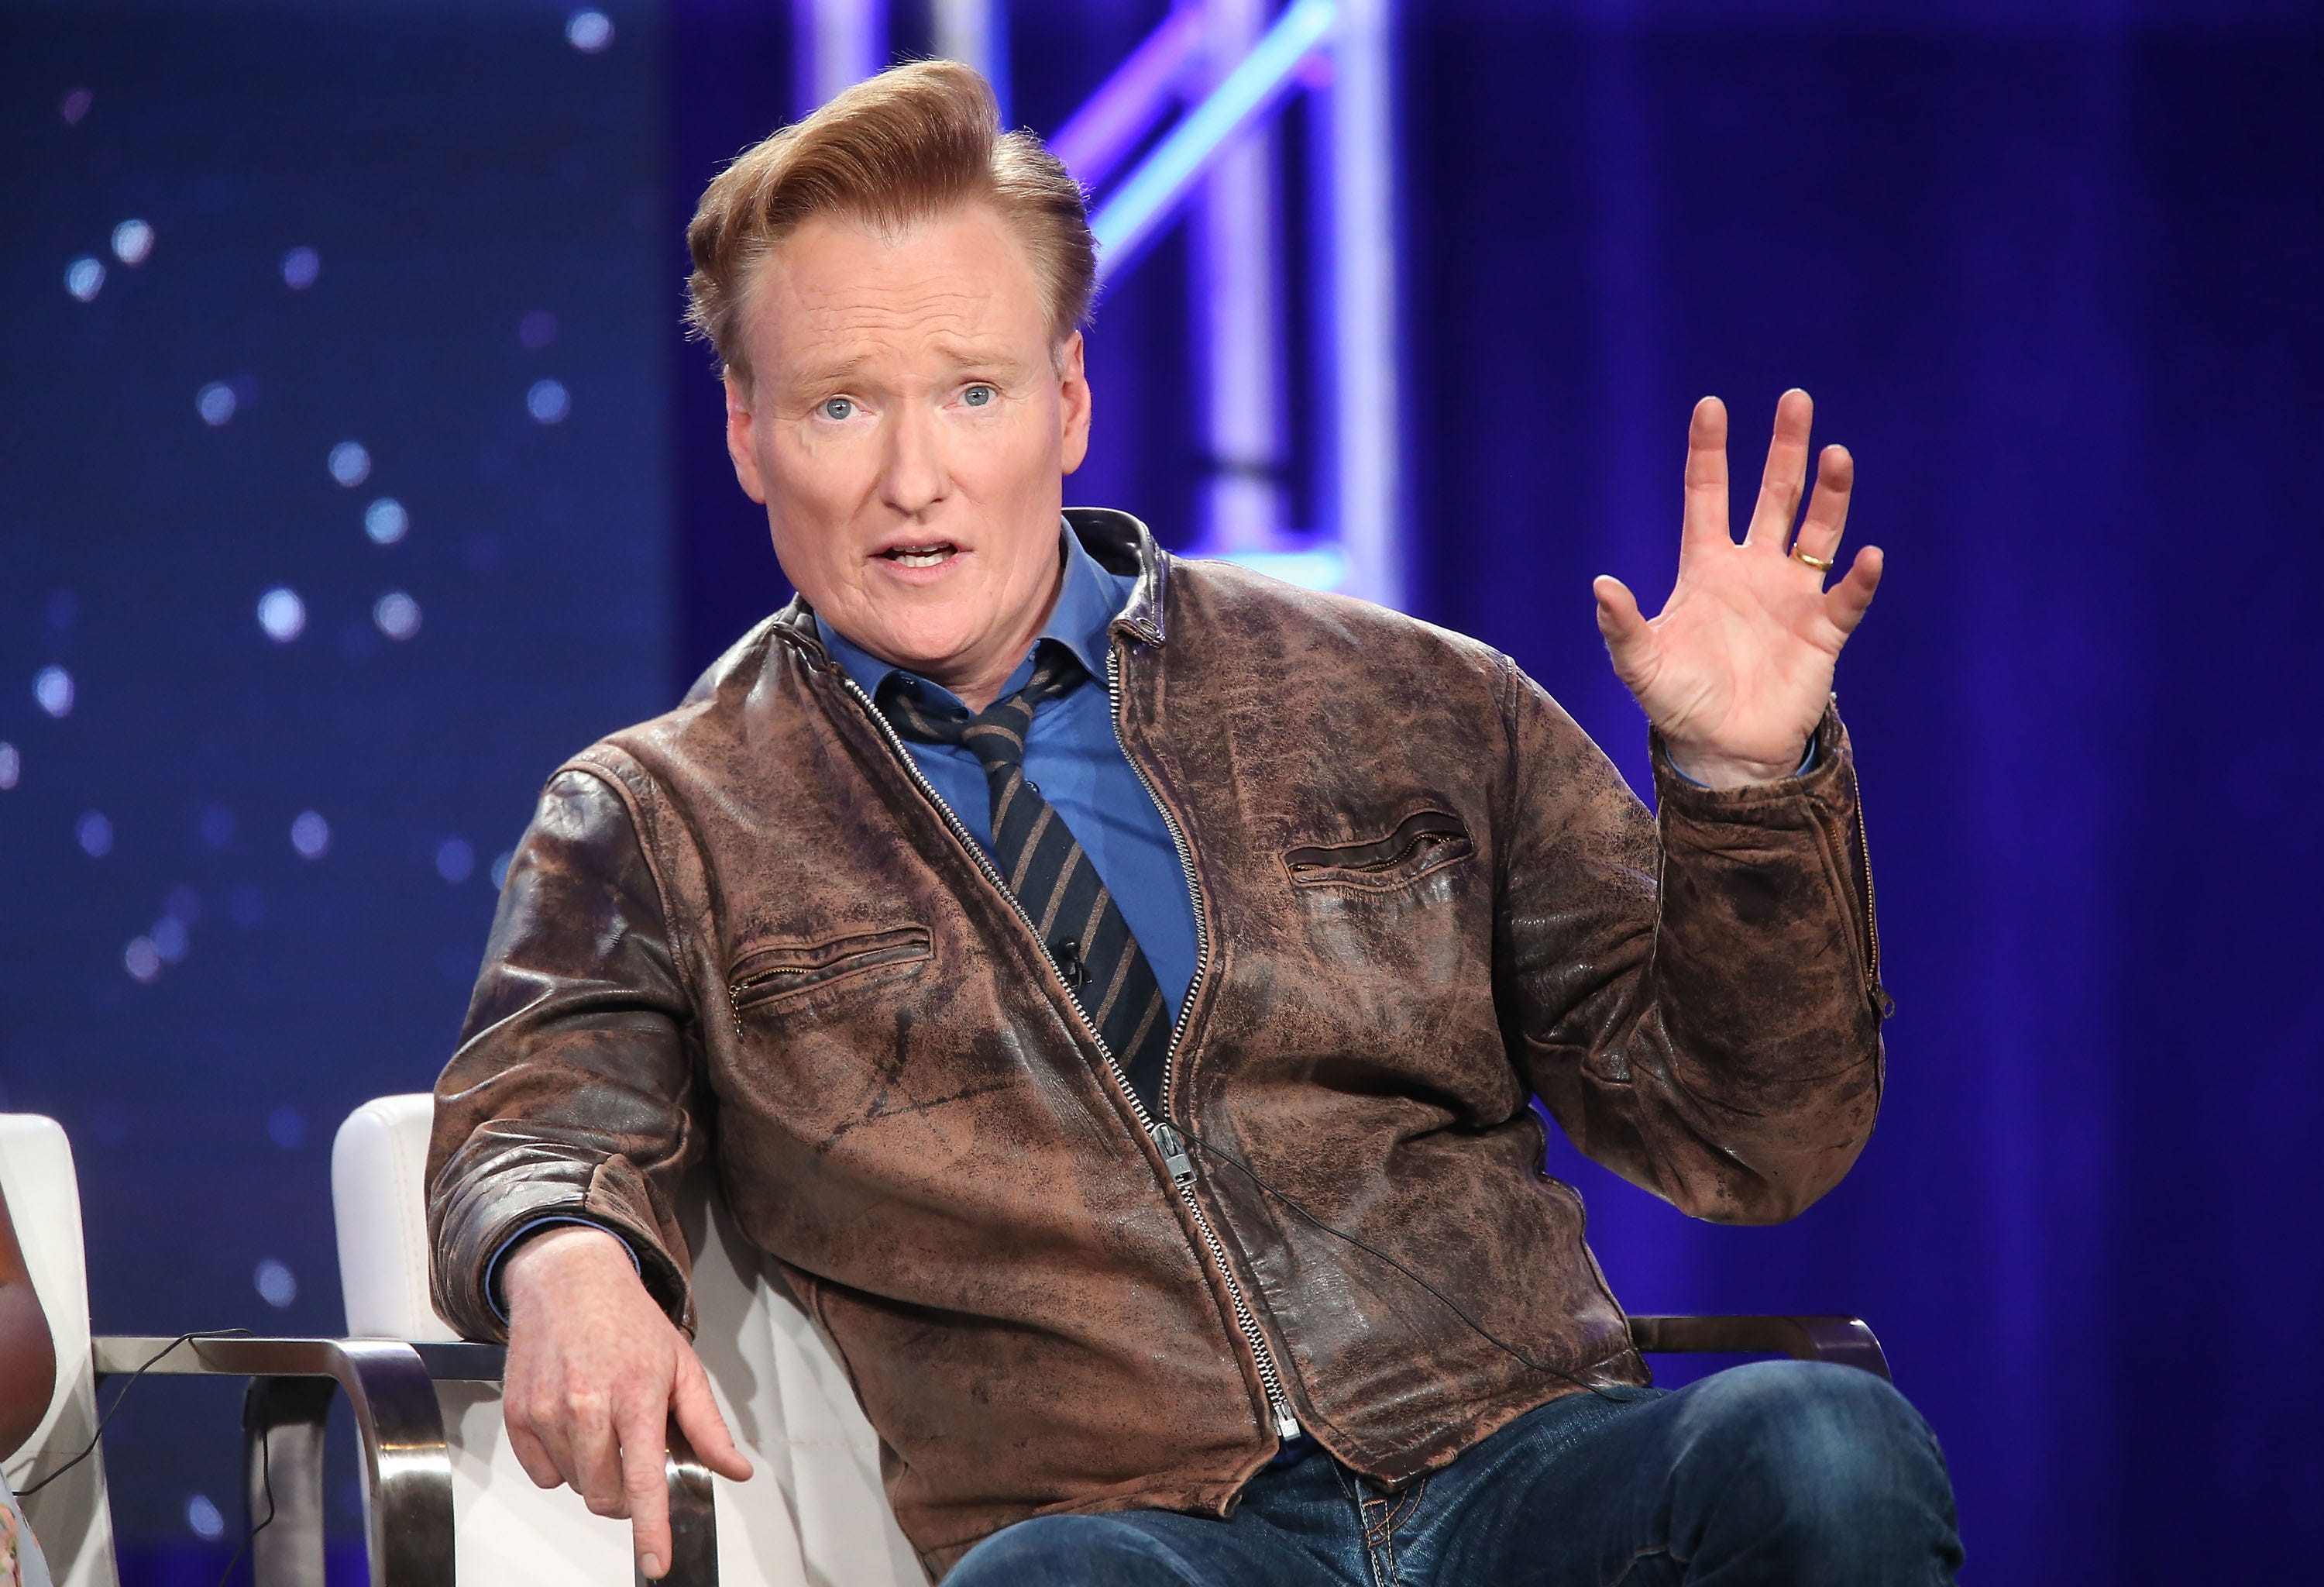 conan o'brien returns to 'the tonight show' after 2010 firing: 'it's weird to come back'